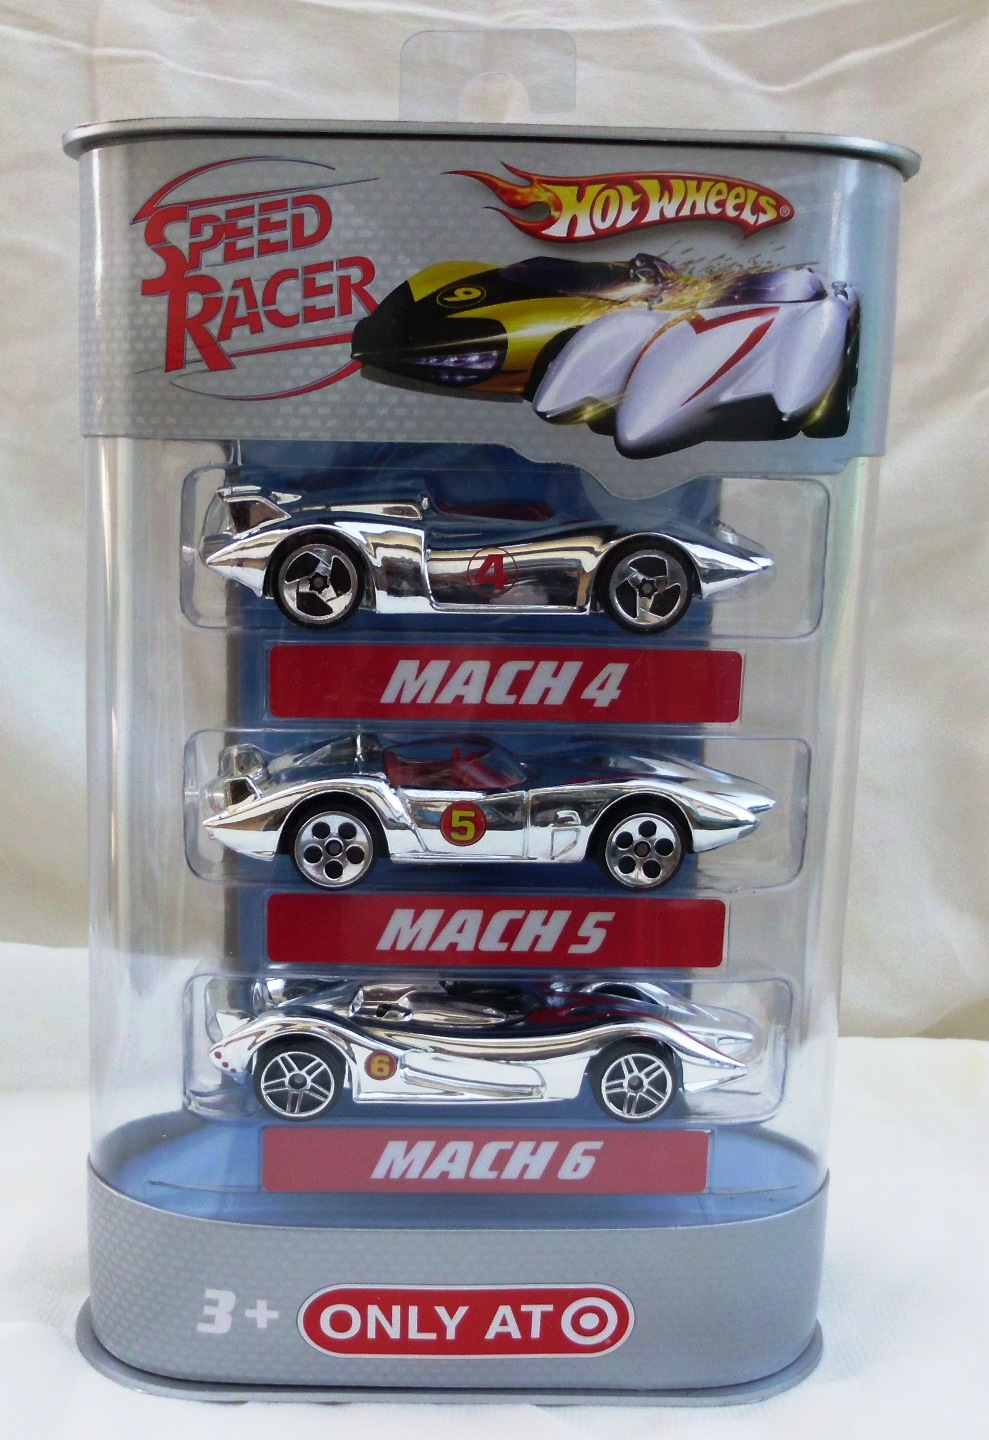 Details about   WHITE HOT WHEELS SPEED RACER MACH 6 RC CAR 27 MHZ W/ REMOTE 2007 MATTEL Tested